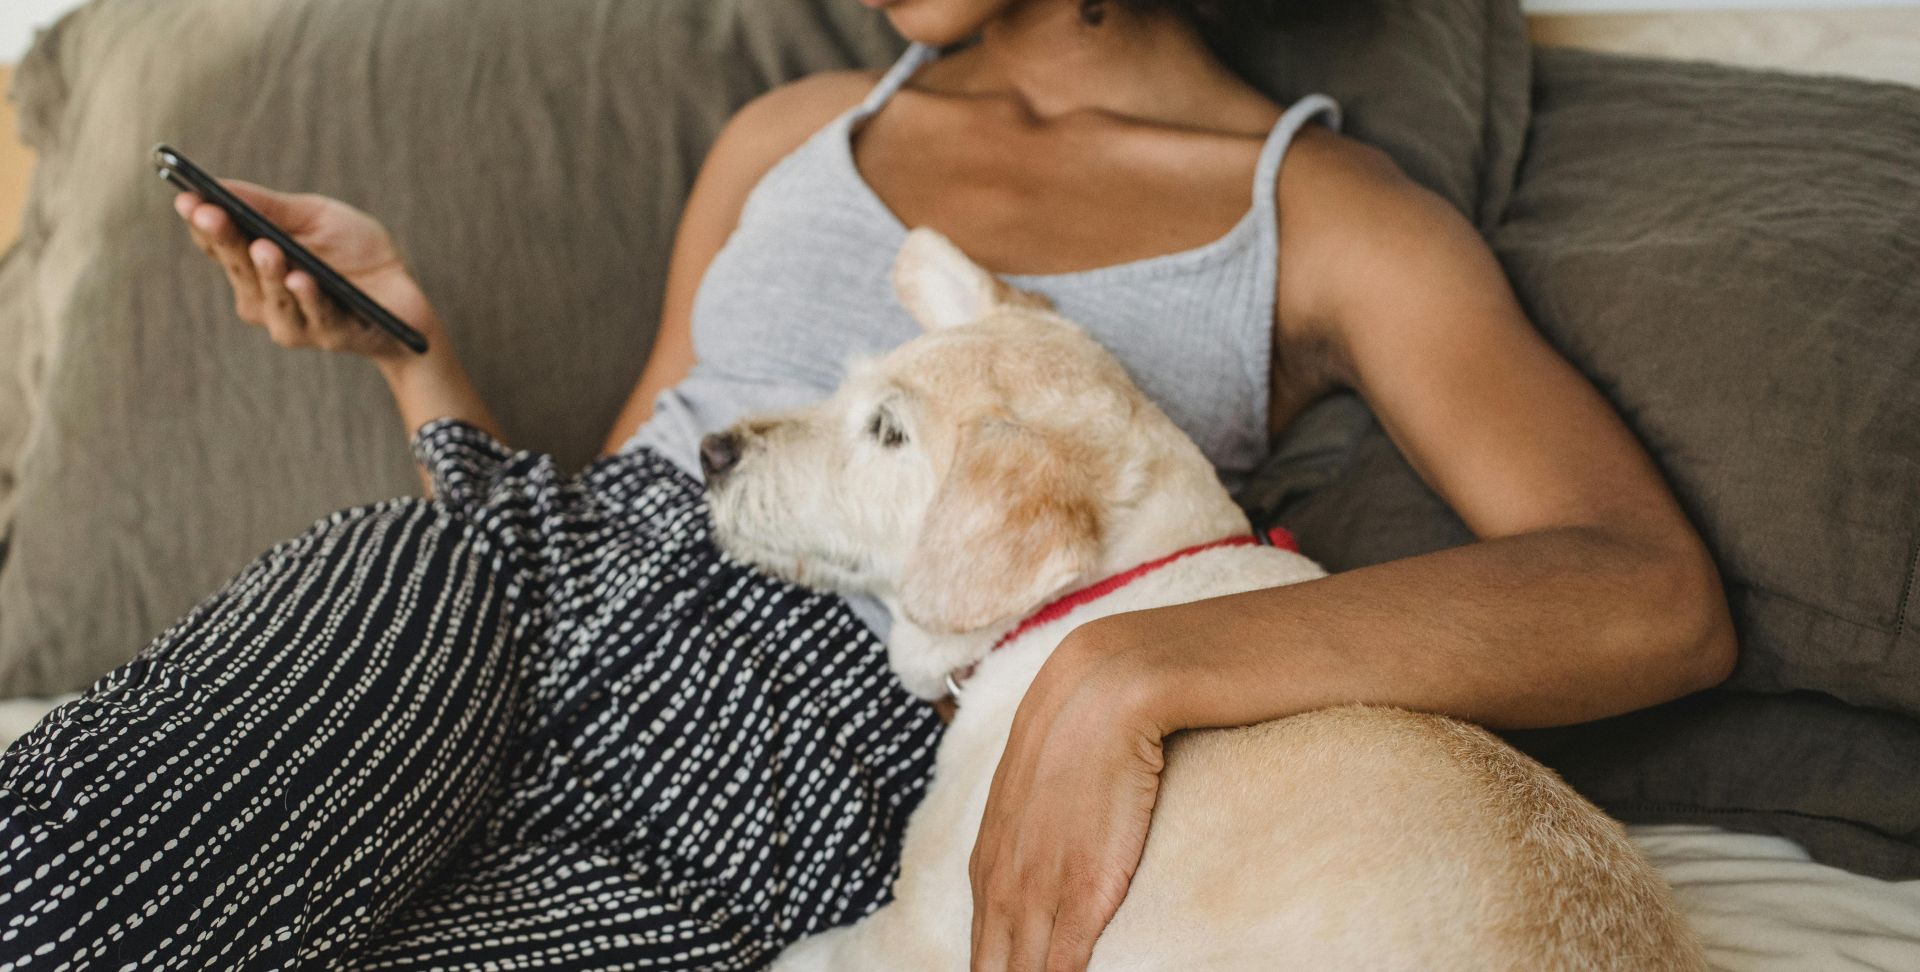 Crop ethnic woman with smartphone embracing dog on bed